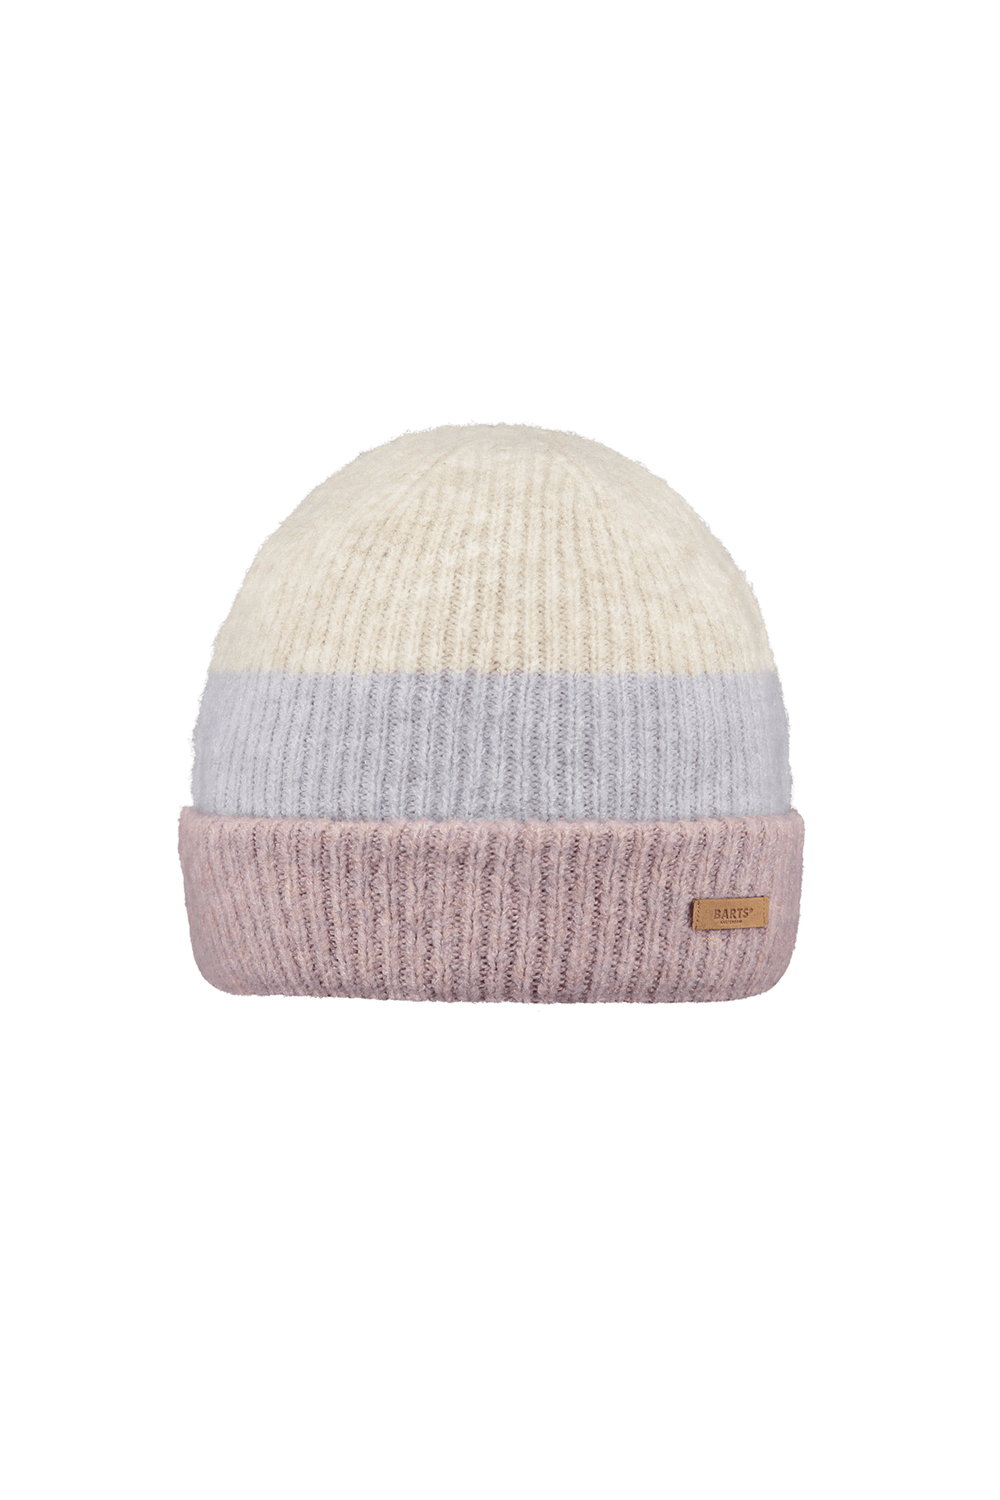 Orchid Barts Suzam Beanie